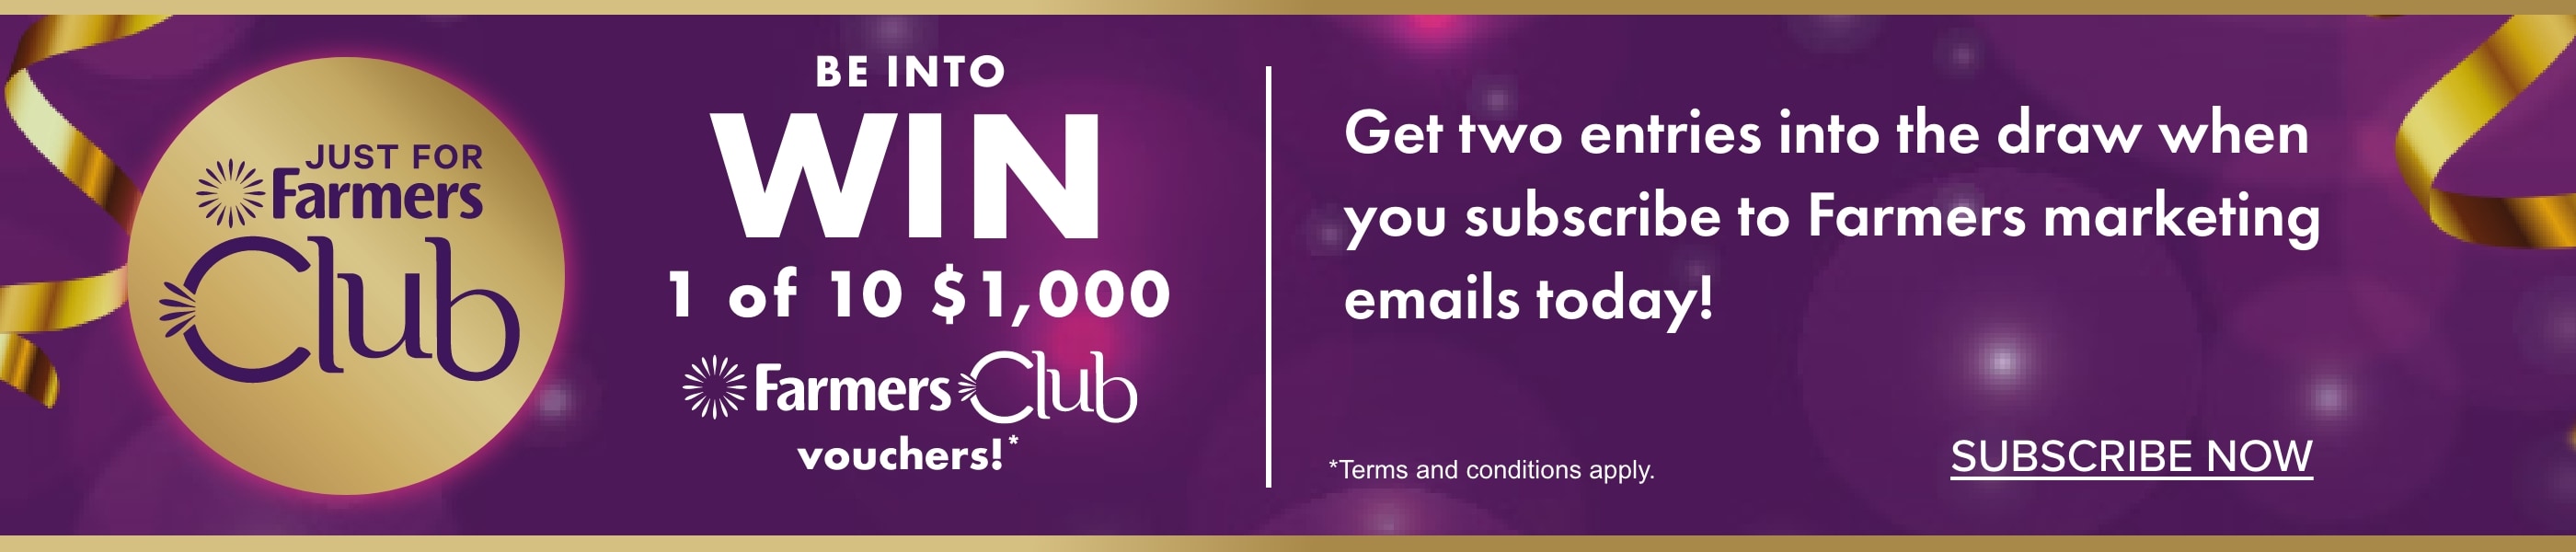 BE INTO WIN 1 of 10 $1,000 Farmers Club vouchers!